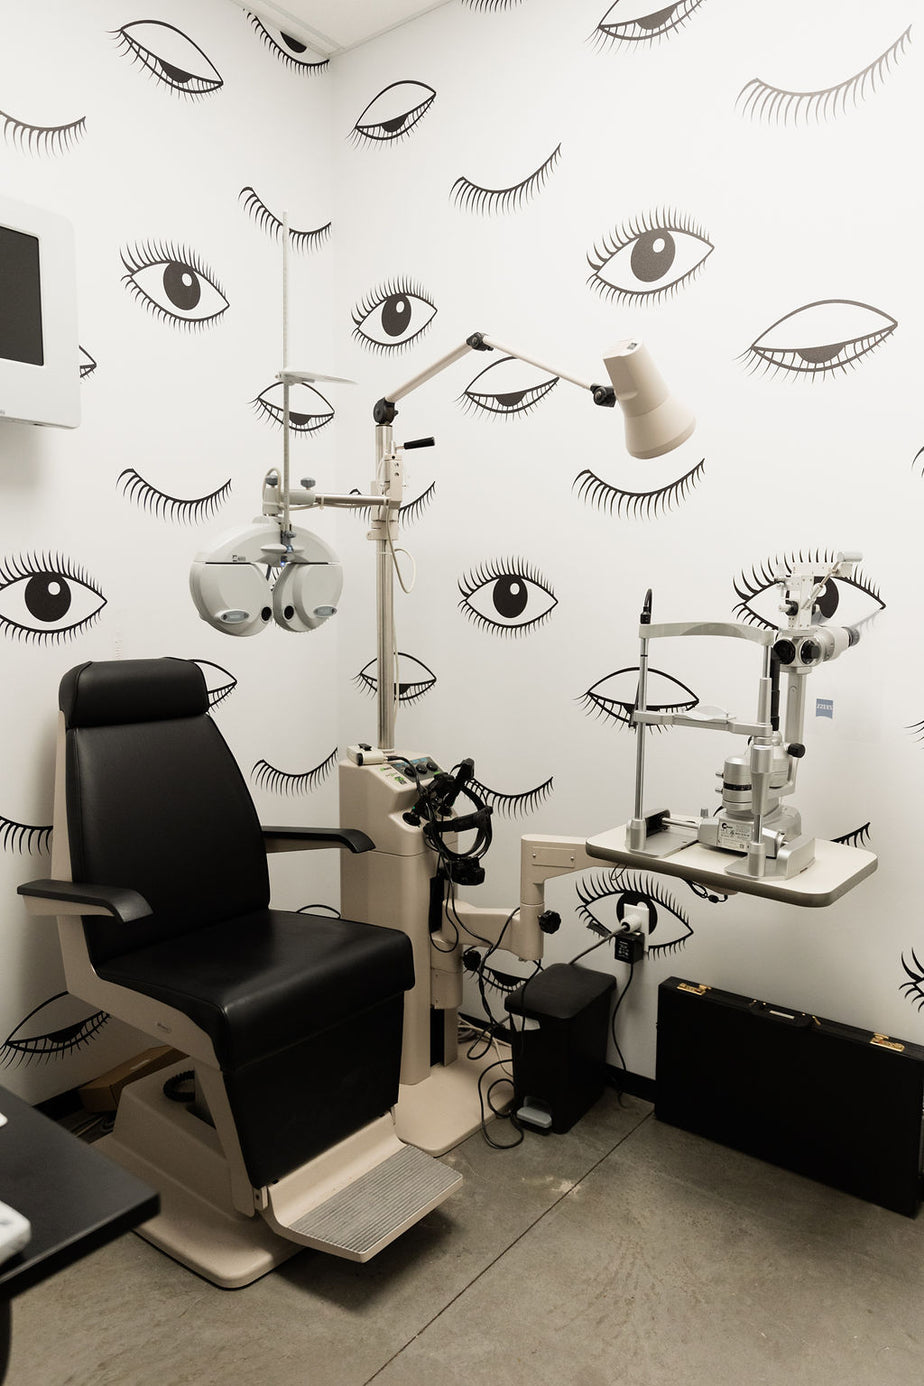 Picture of eye exam chair with eye exam equipment